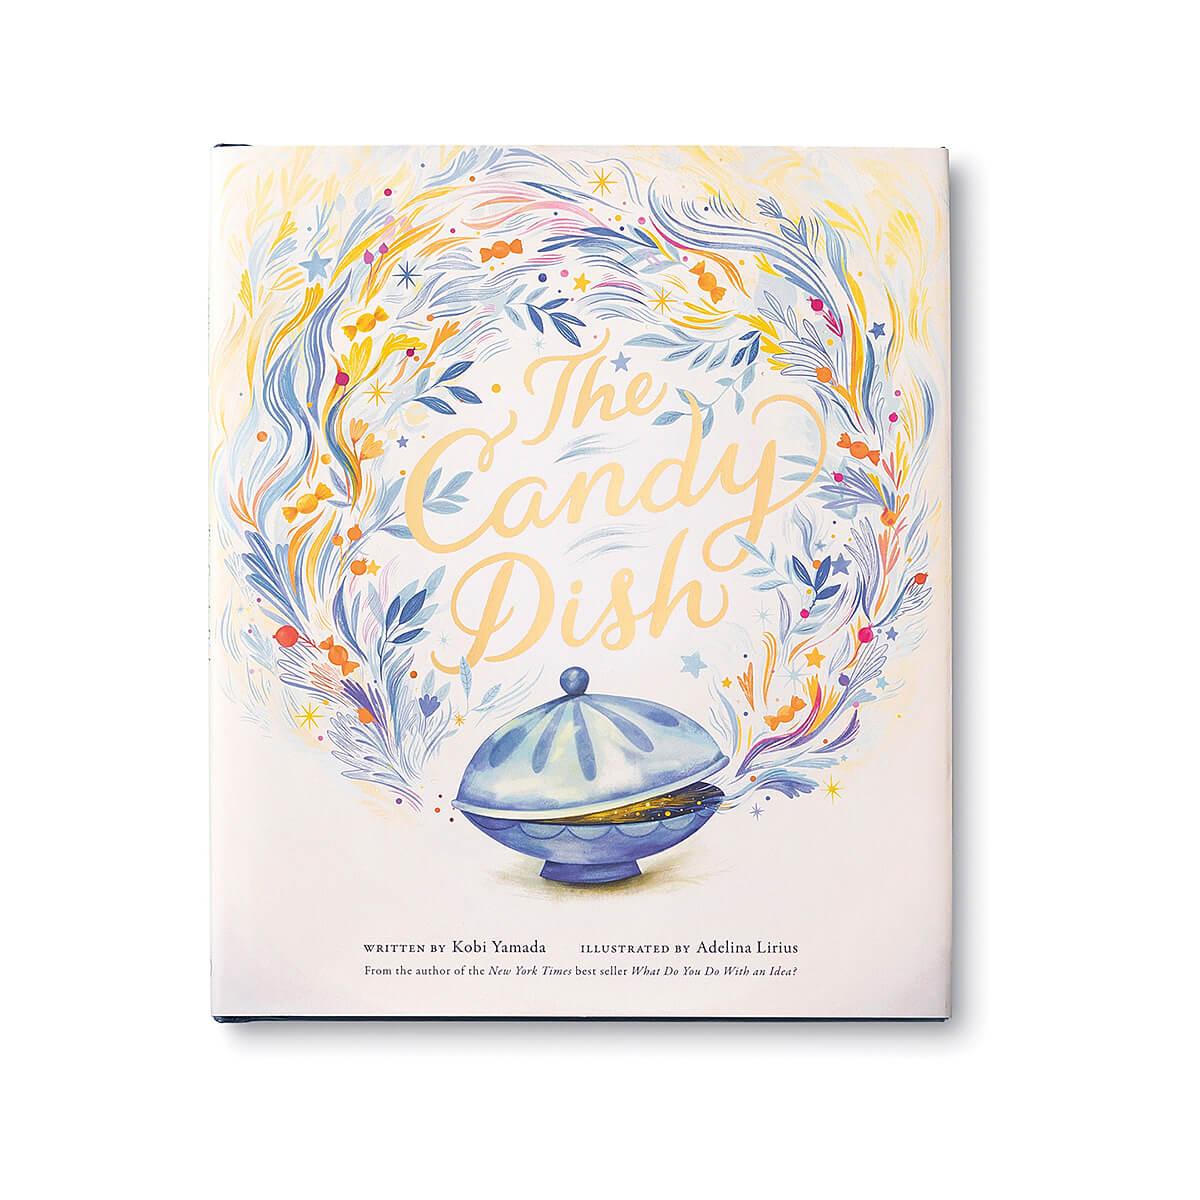  The Candy Dish Book